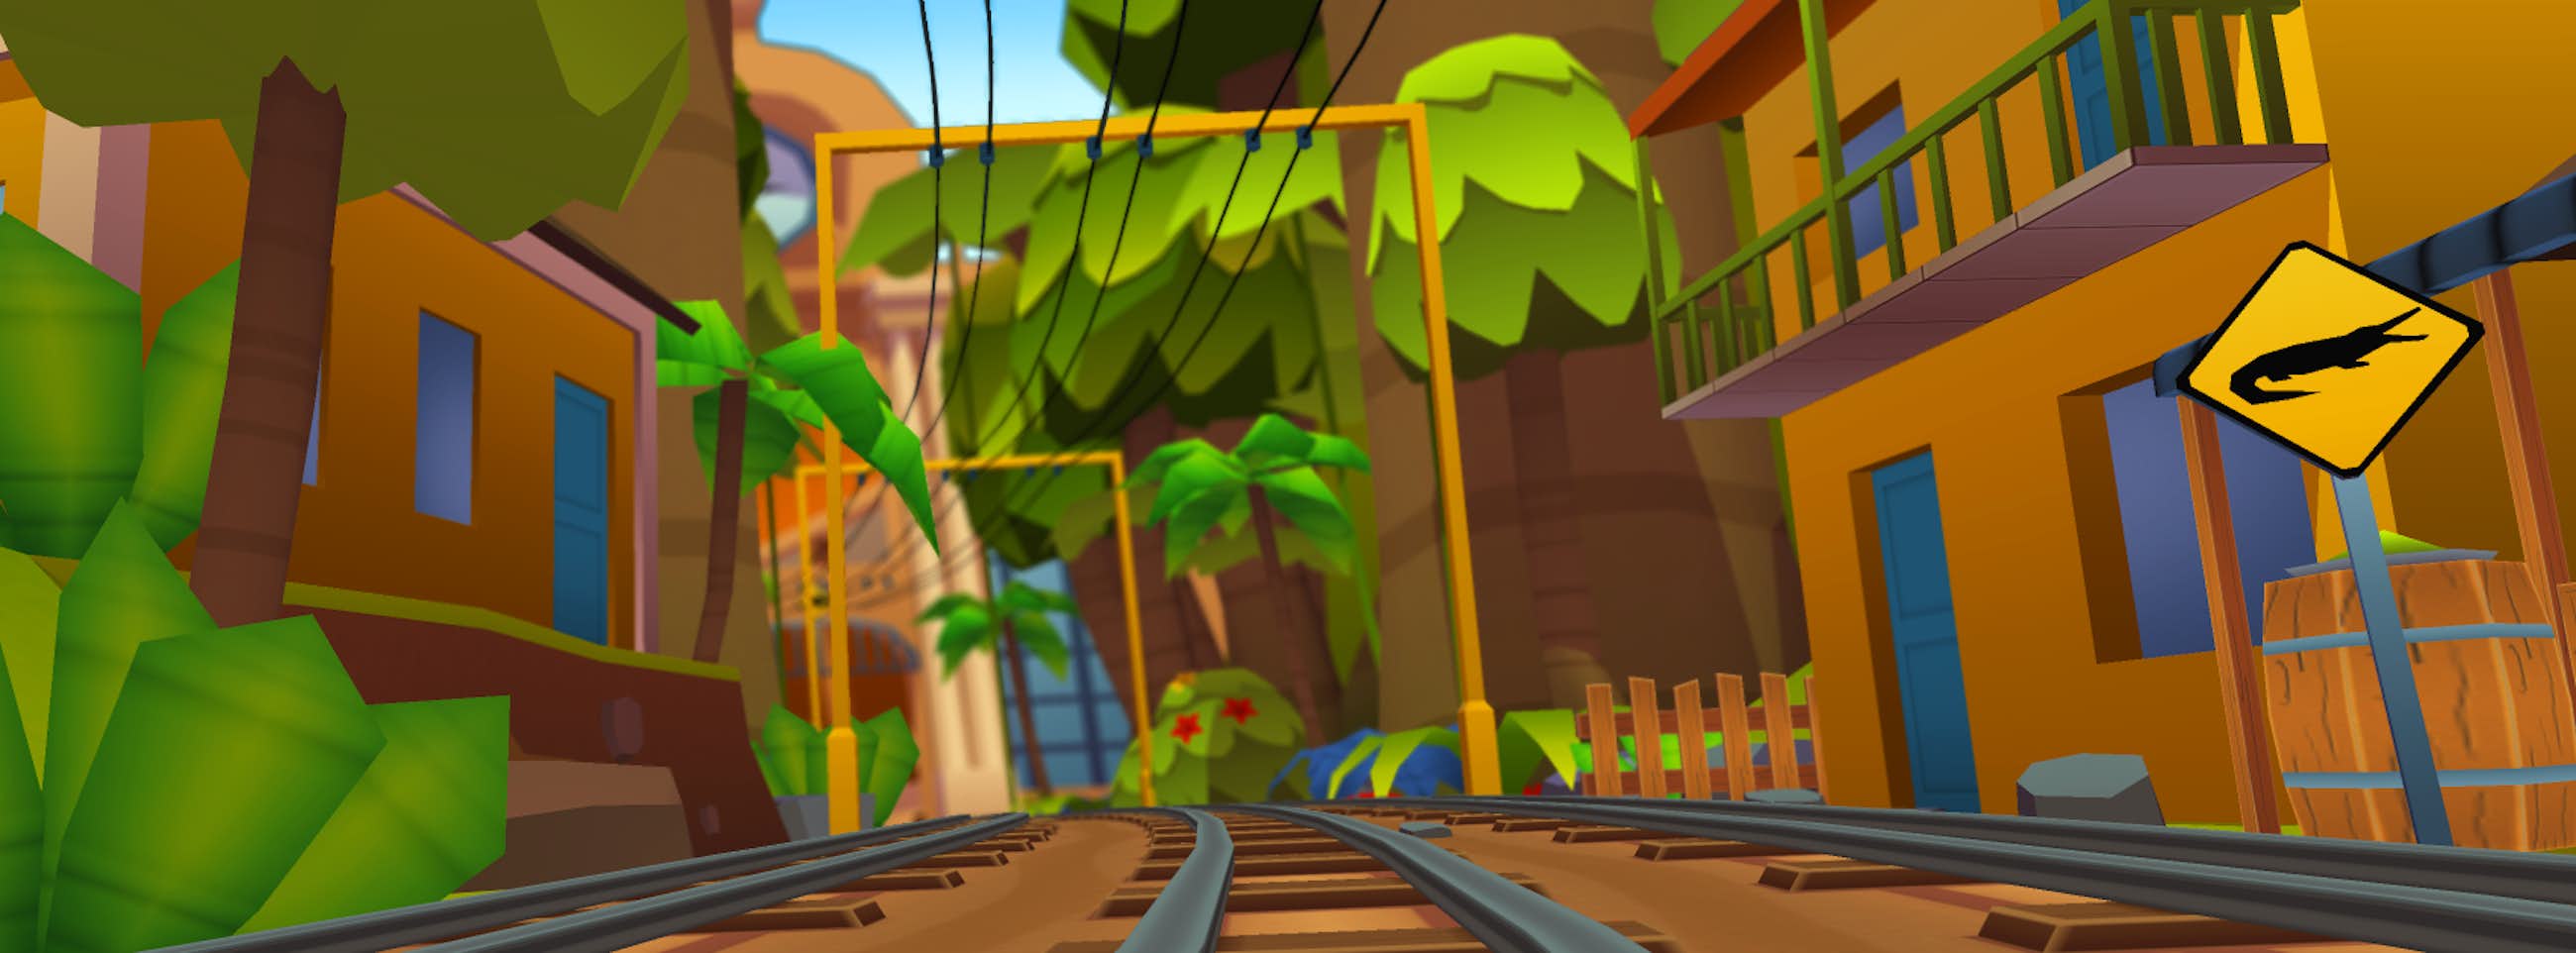 Subway Surfers - Dance your way through the beautiful